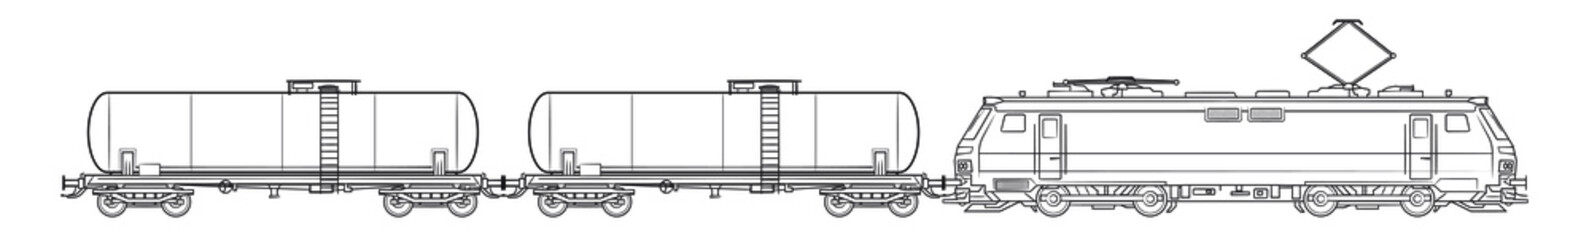 Cargo train with tanker wagons - outline vector stock illustration.